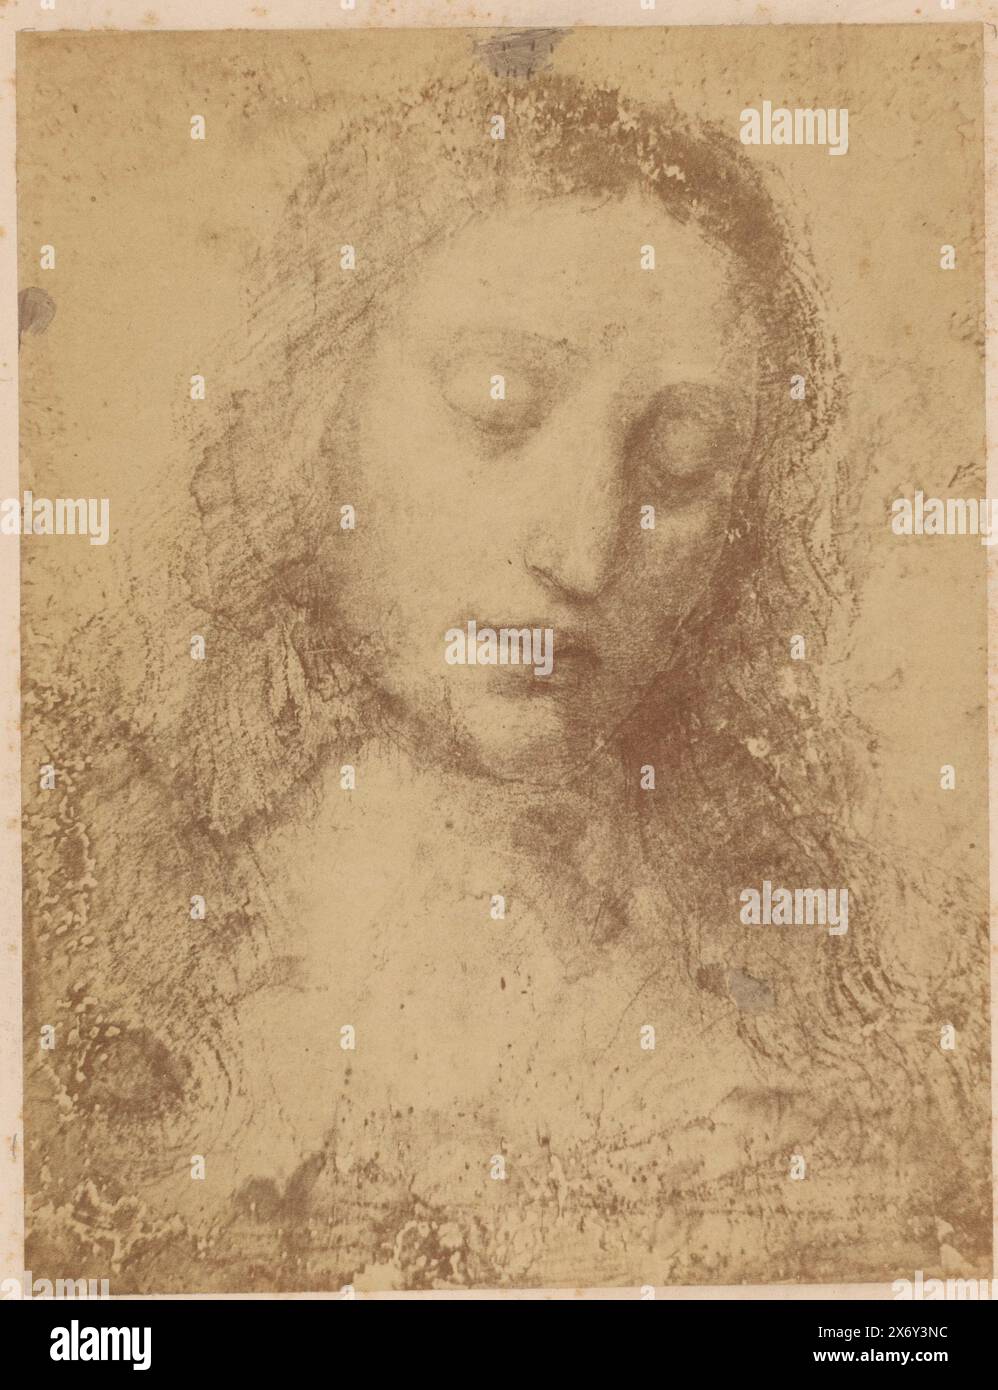 Photo reproduction of the drawing Head of Jesus (preliminary study for the fresco The Last Supper) by Leonardo da Vinci, L. da Vinci - Study for the Jesus of the supper - Breza in Milan (title on object), photograph, Pompeo Pozzi, (attributed to), after drawing by: Leonardo da Vinci, (mentioned on object), 1851 - 1880, cardboard, albumen print, height, 261 mm × width, 201 mm, height, 478 mm × width, 317 mm Stock Photo